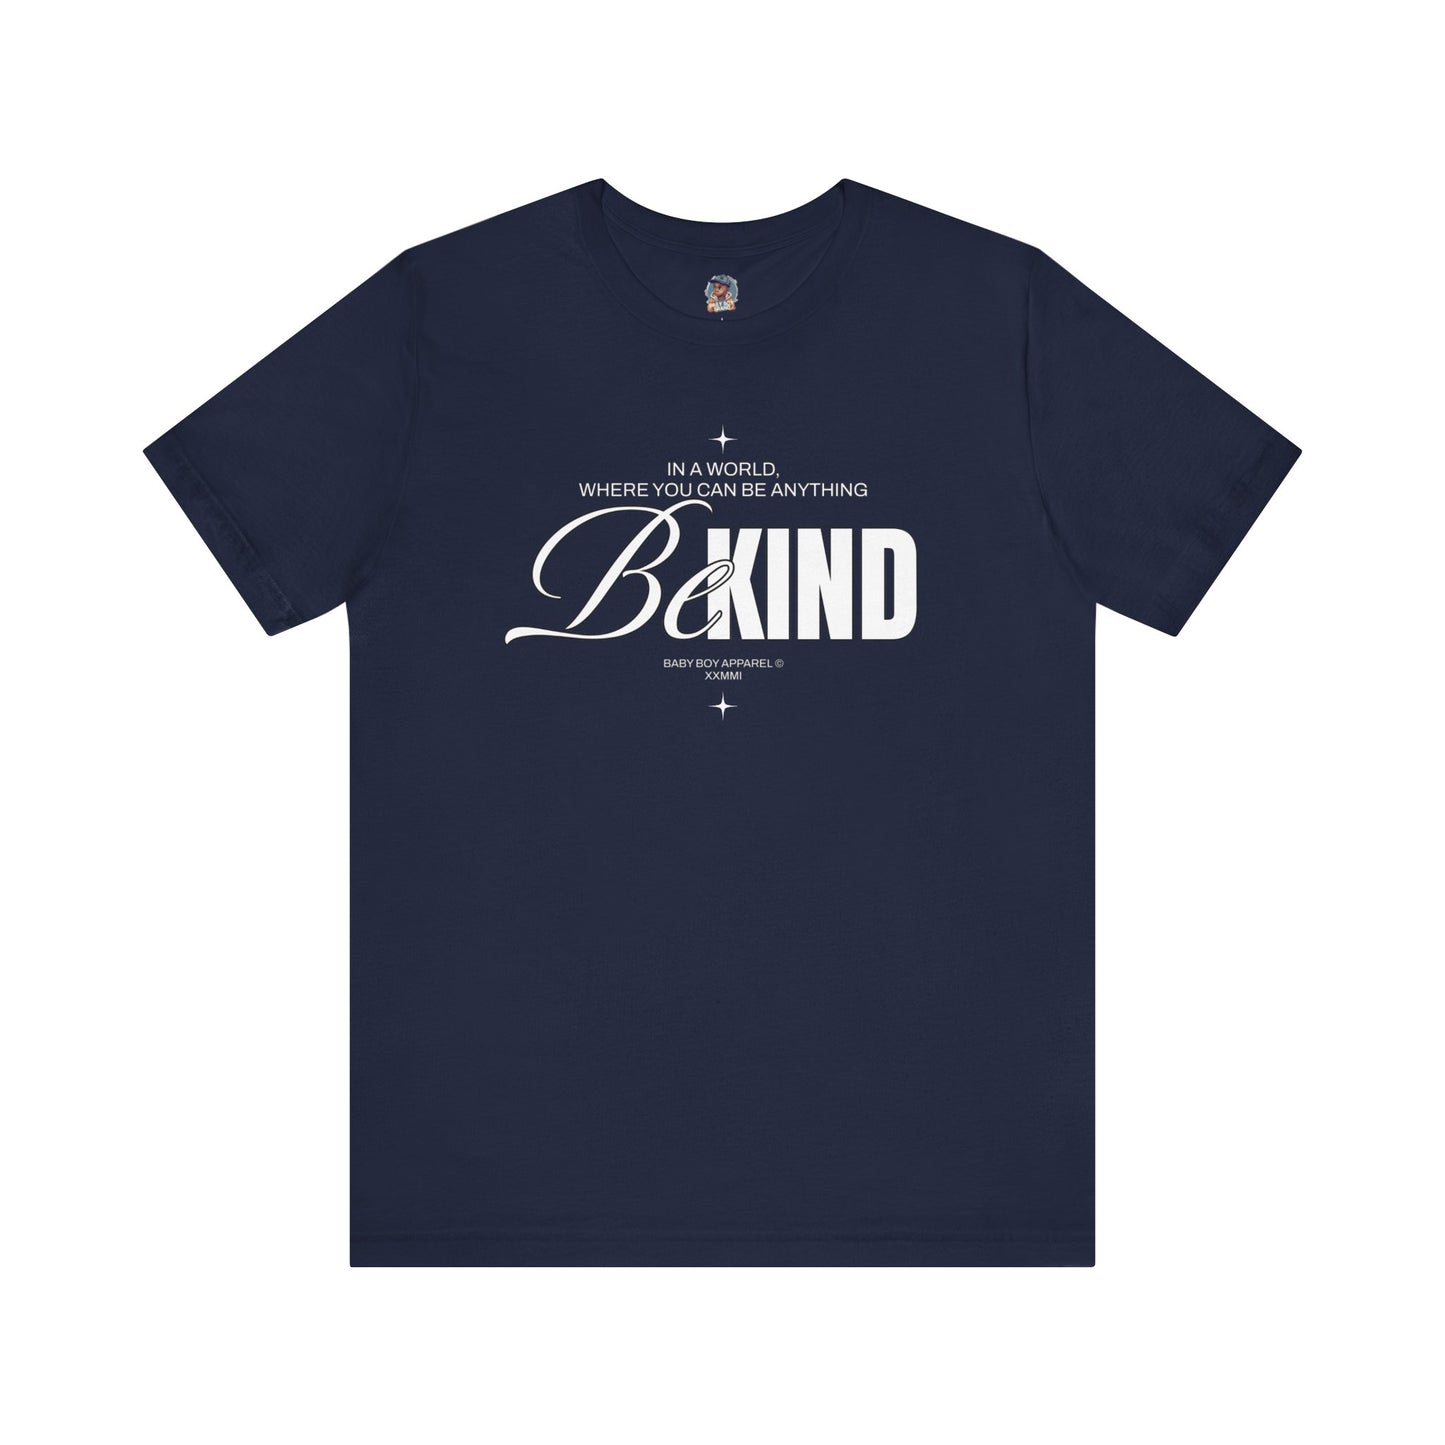 "Be Kind T-shirt"